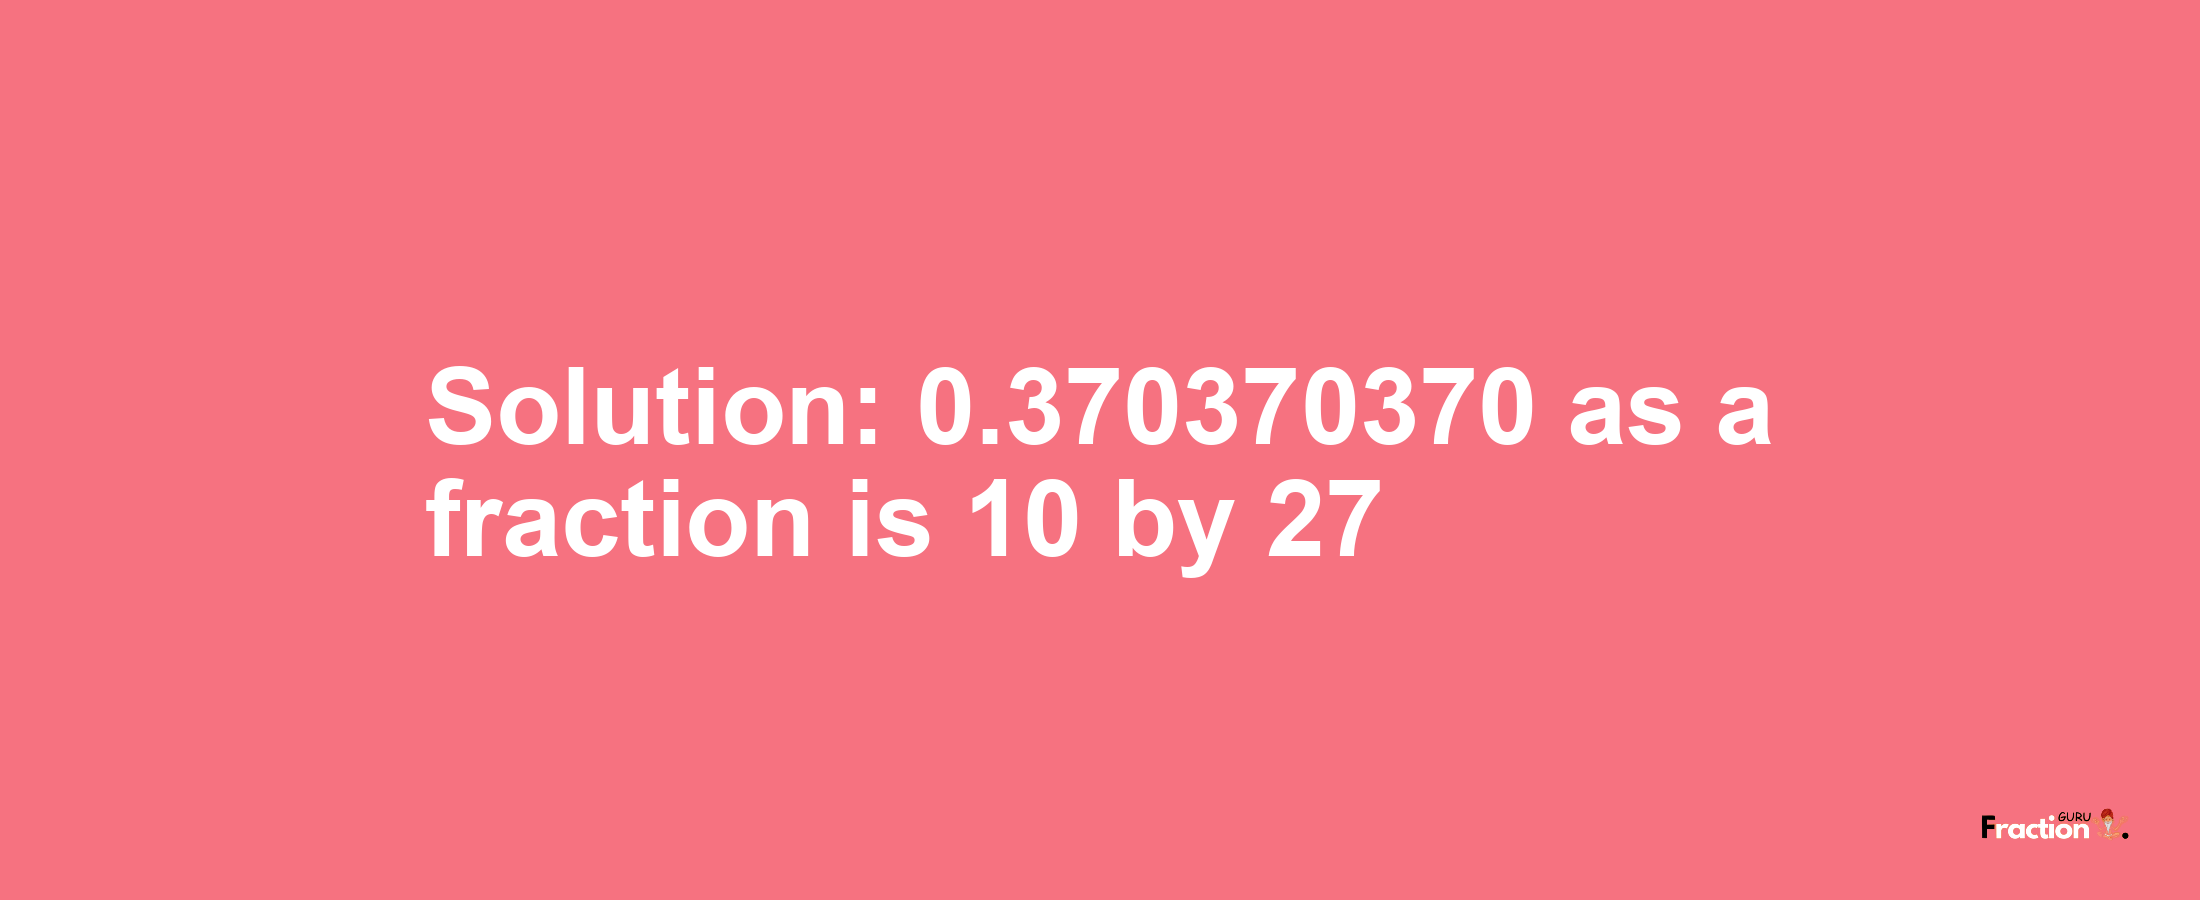 Solution:0.370370370 as a fraction is 10/27